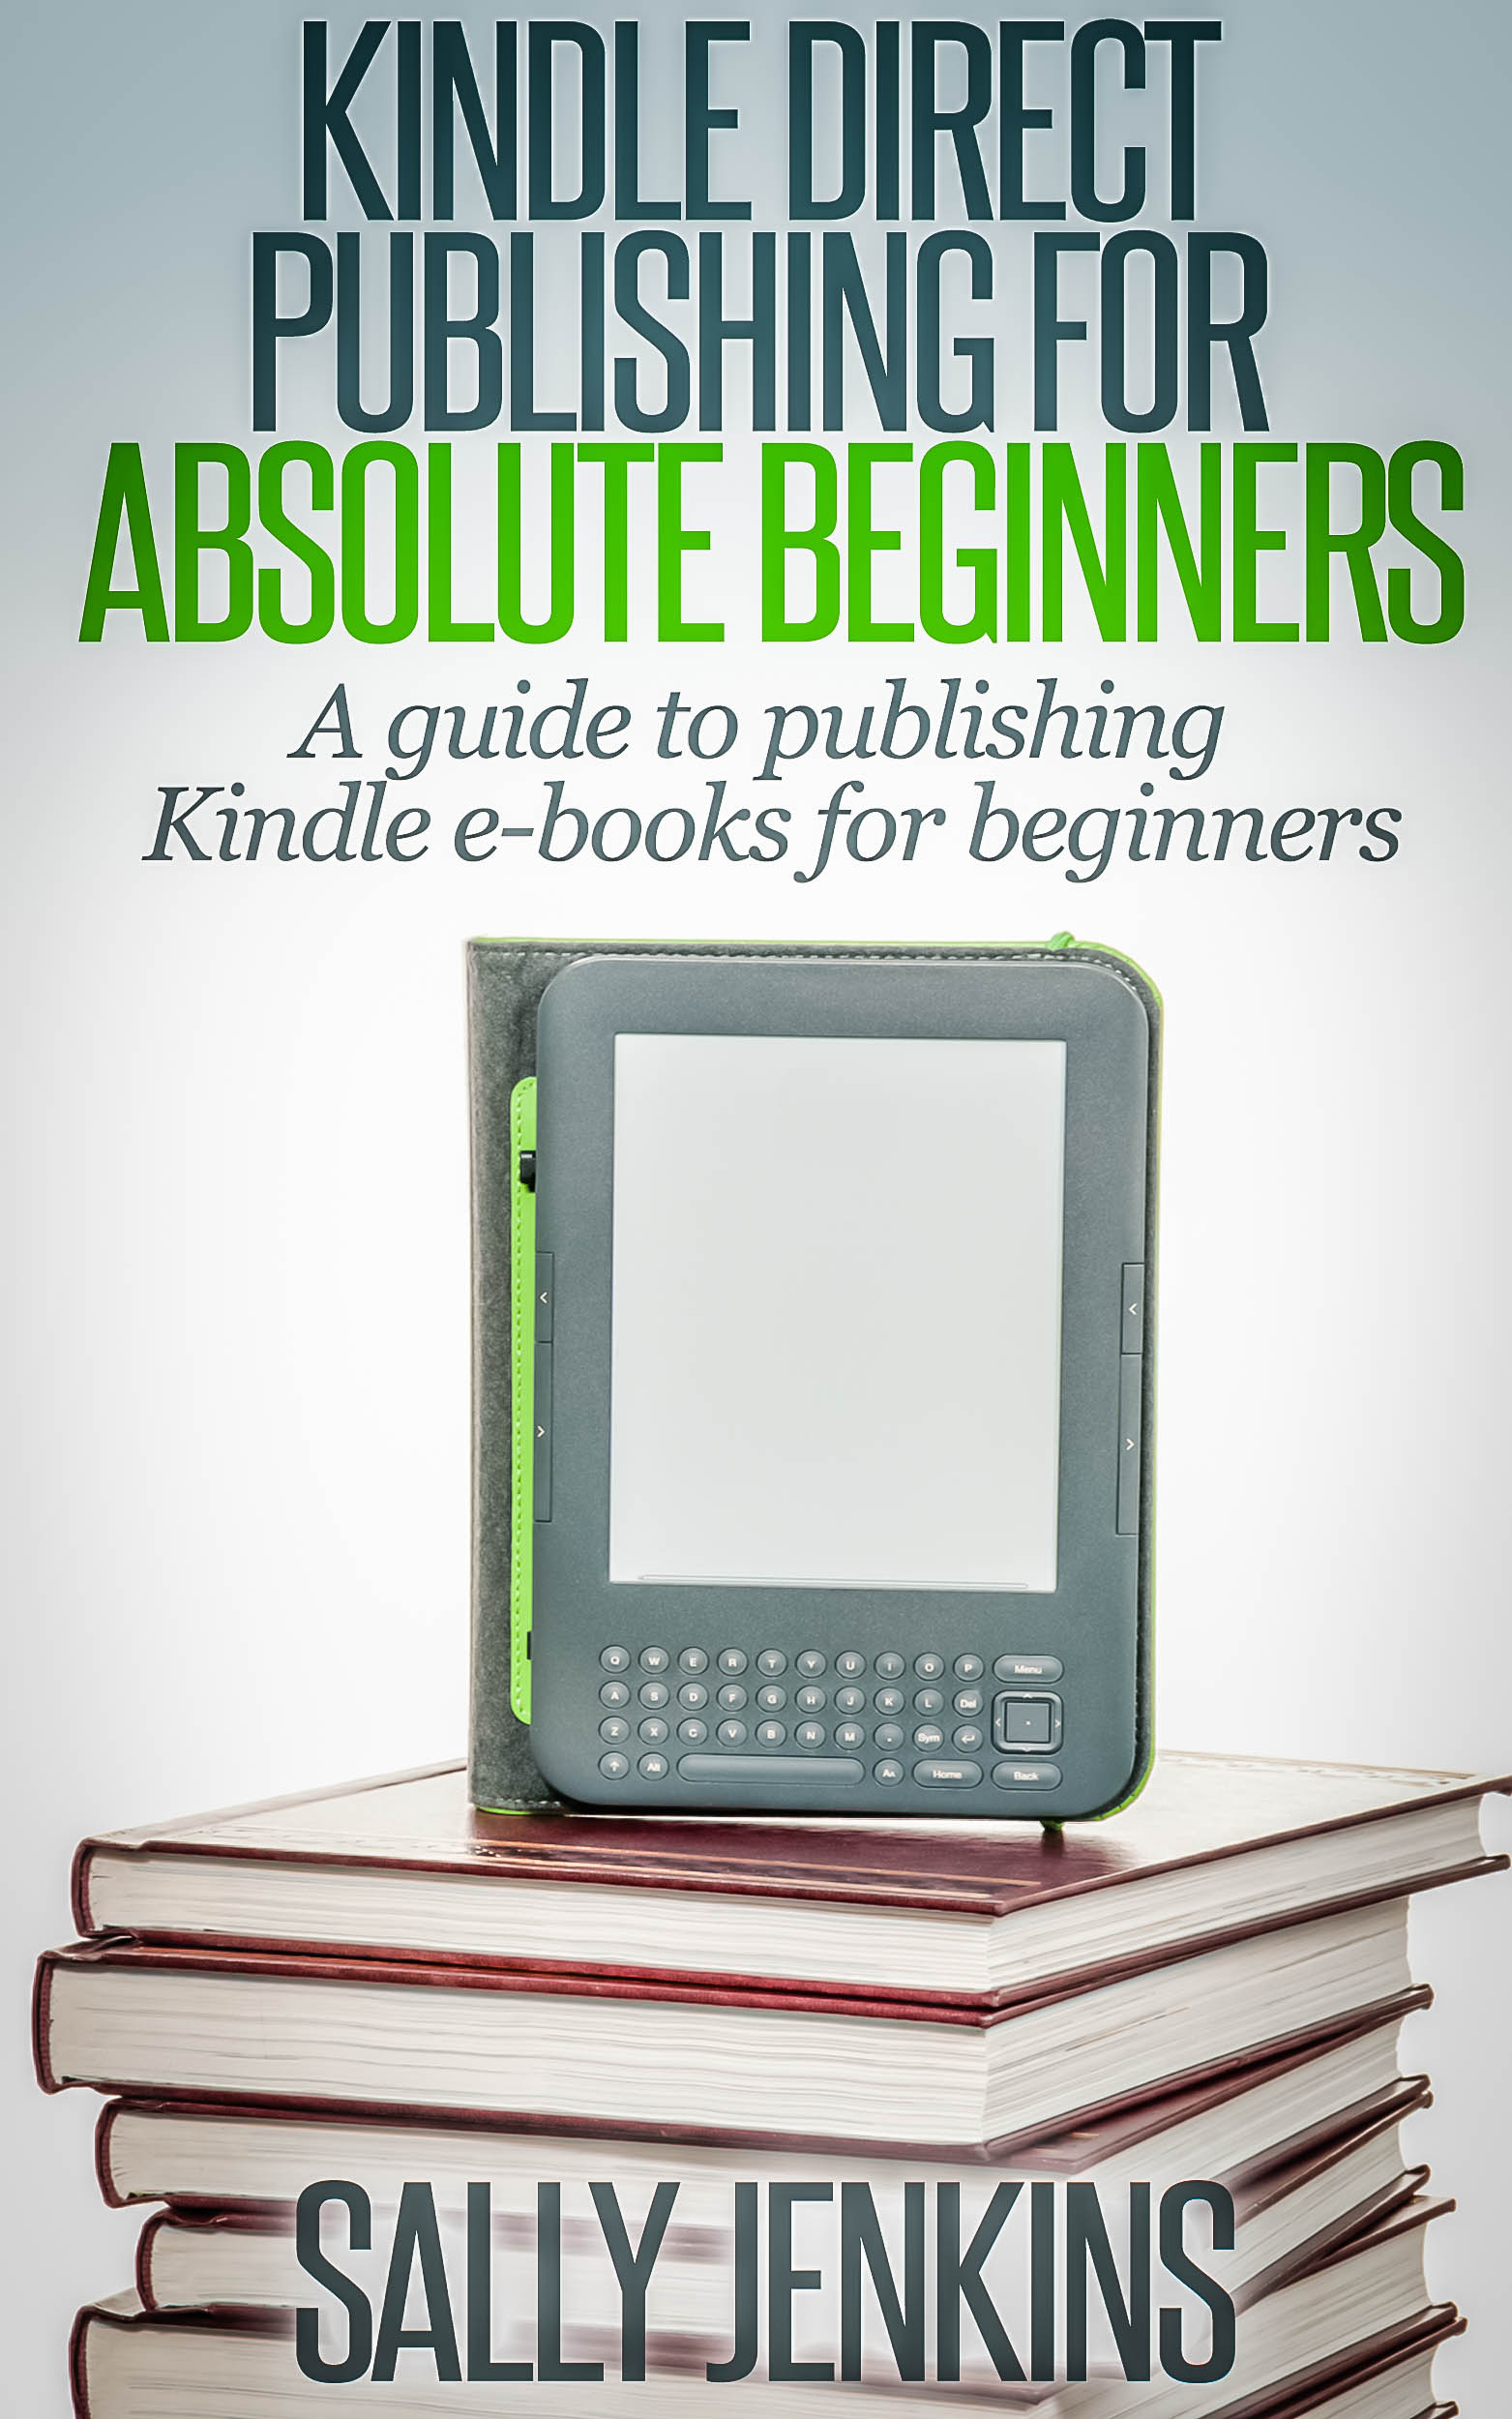 Kindle Direct Publishing for Absolute Beginners